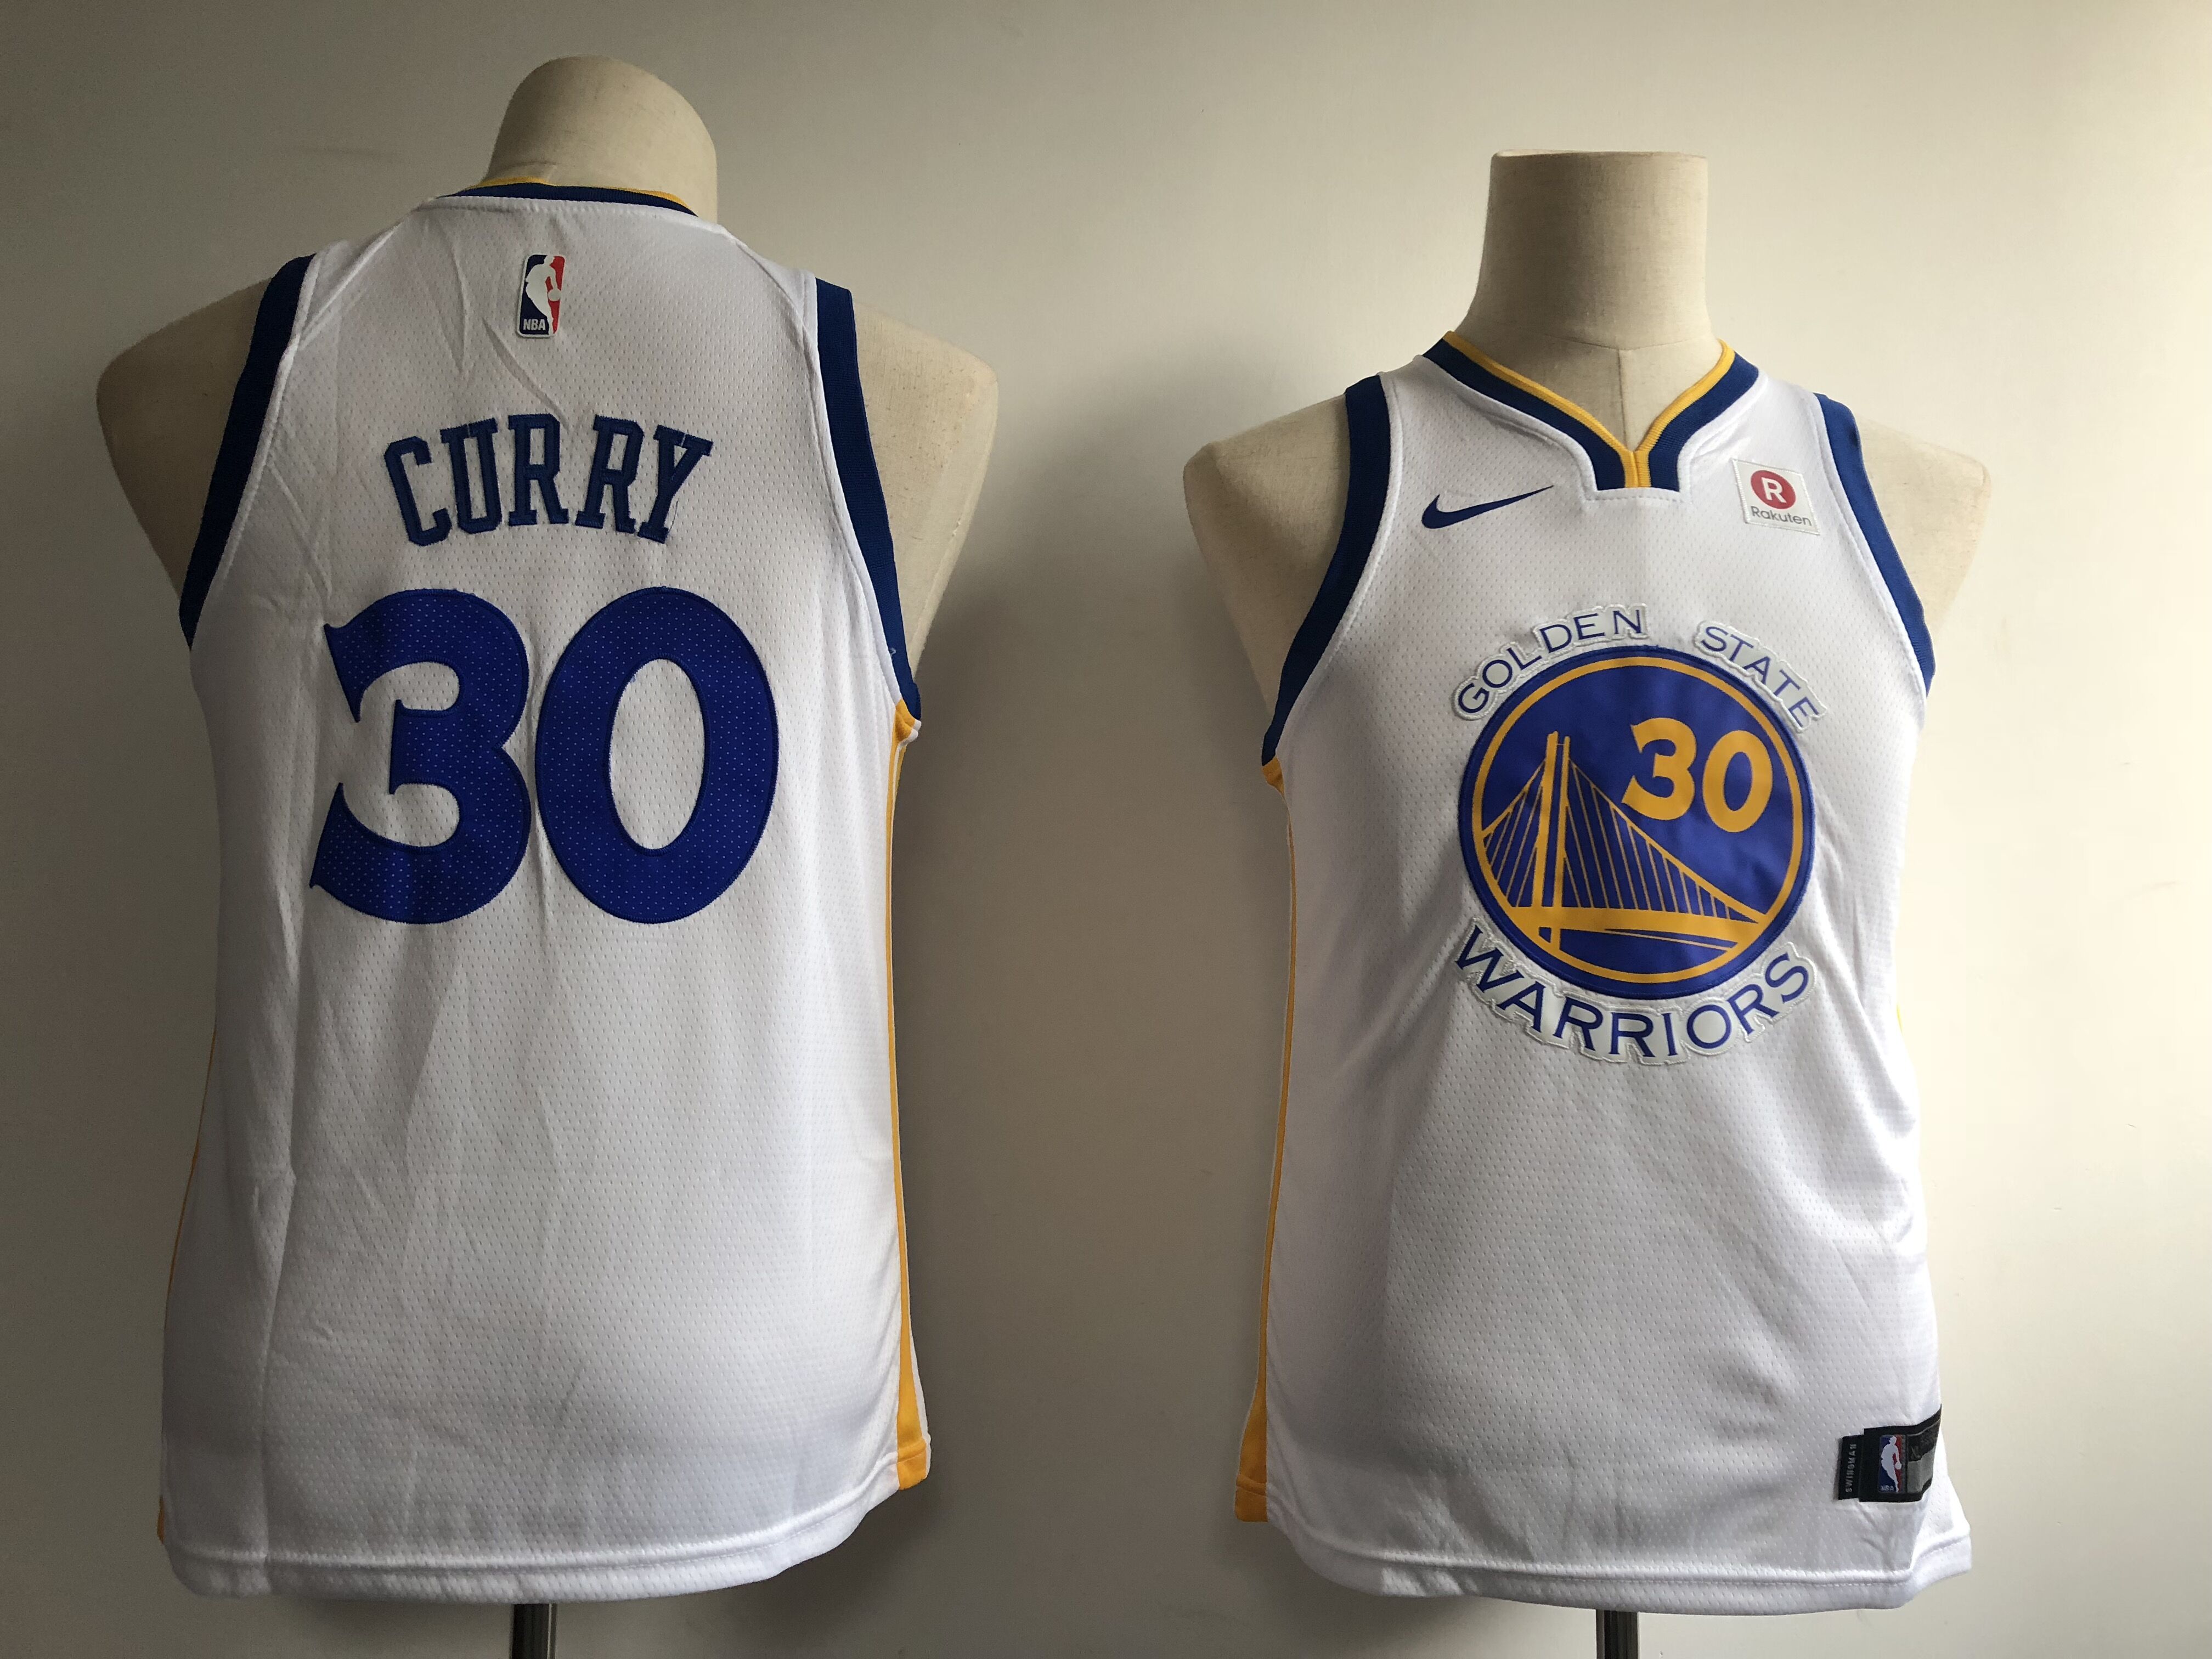 Youth Golden State Warriors 30 Curry white limited NBA Nike Jerseys